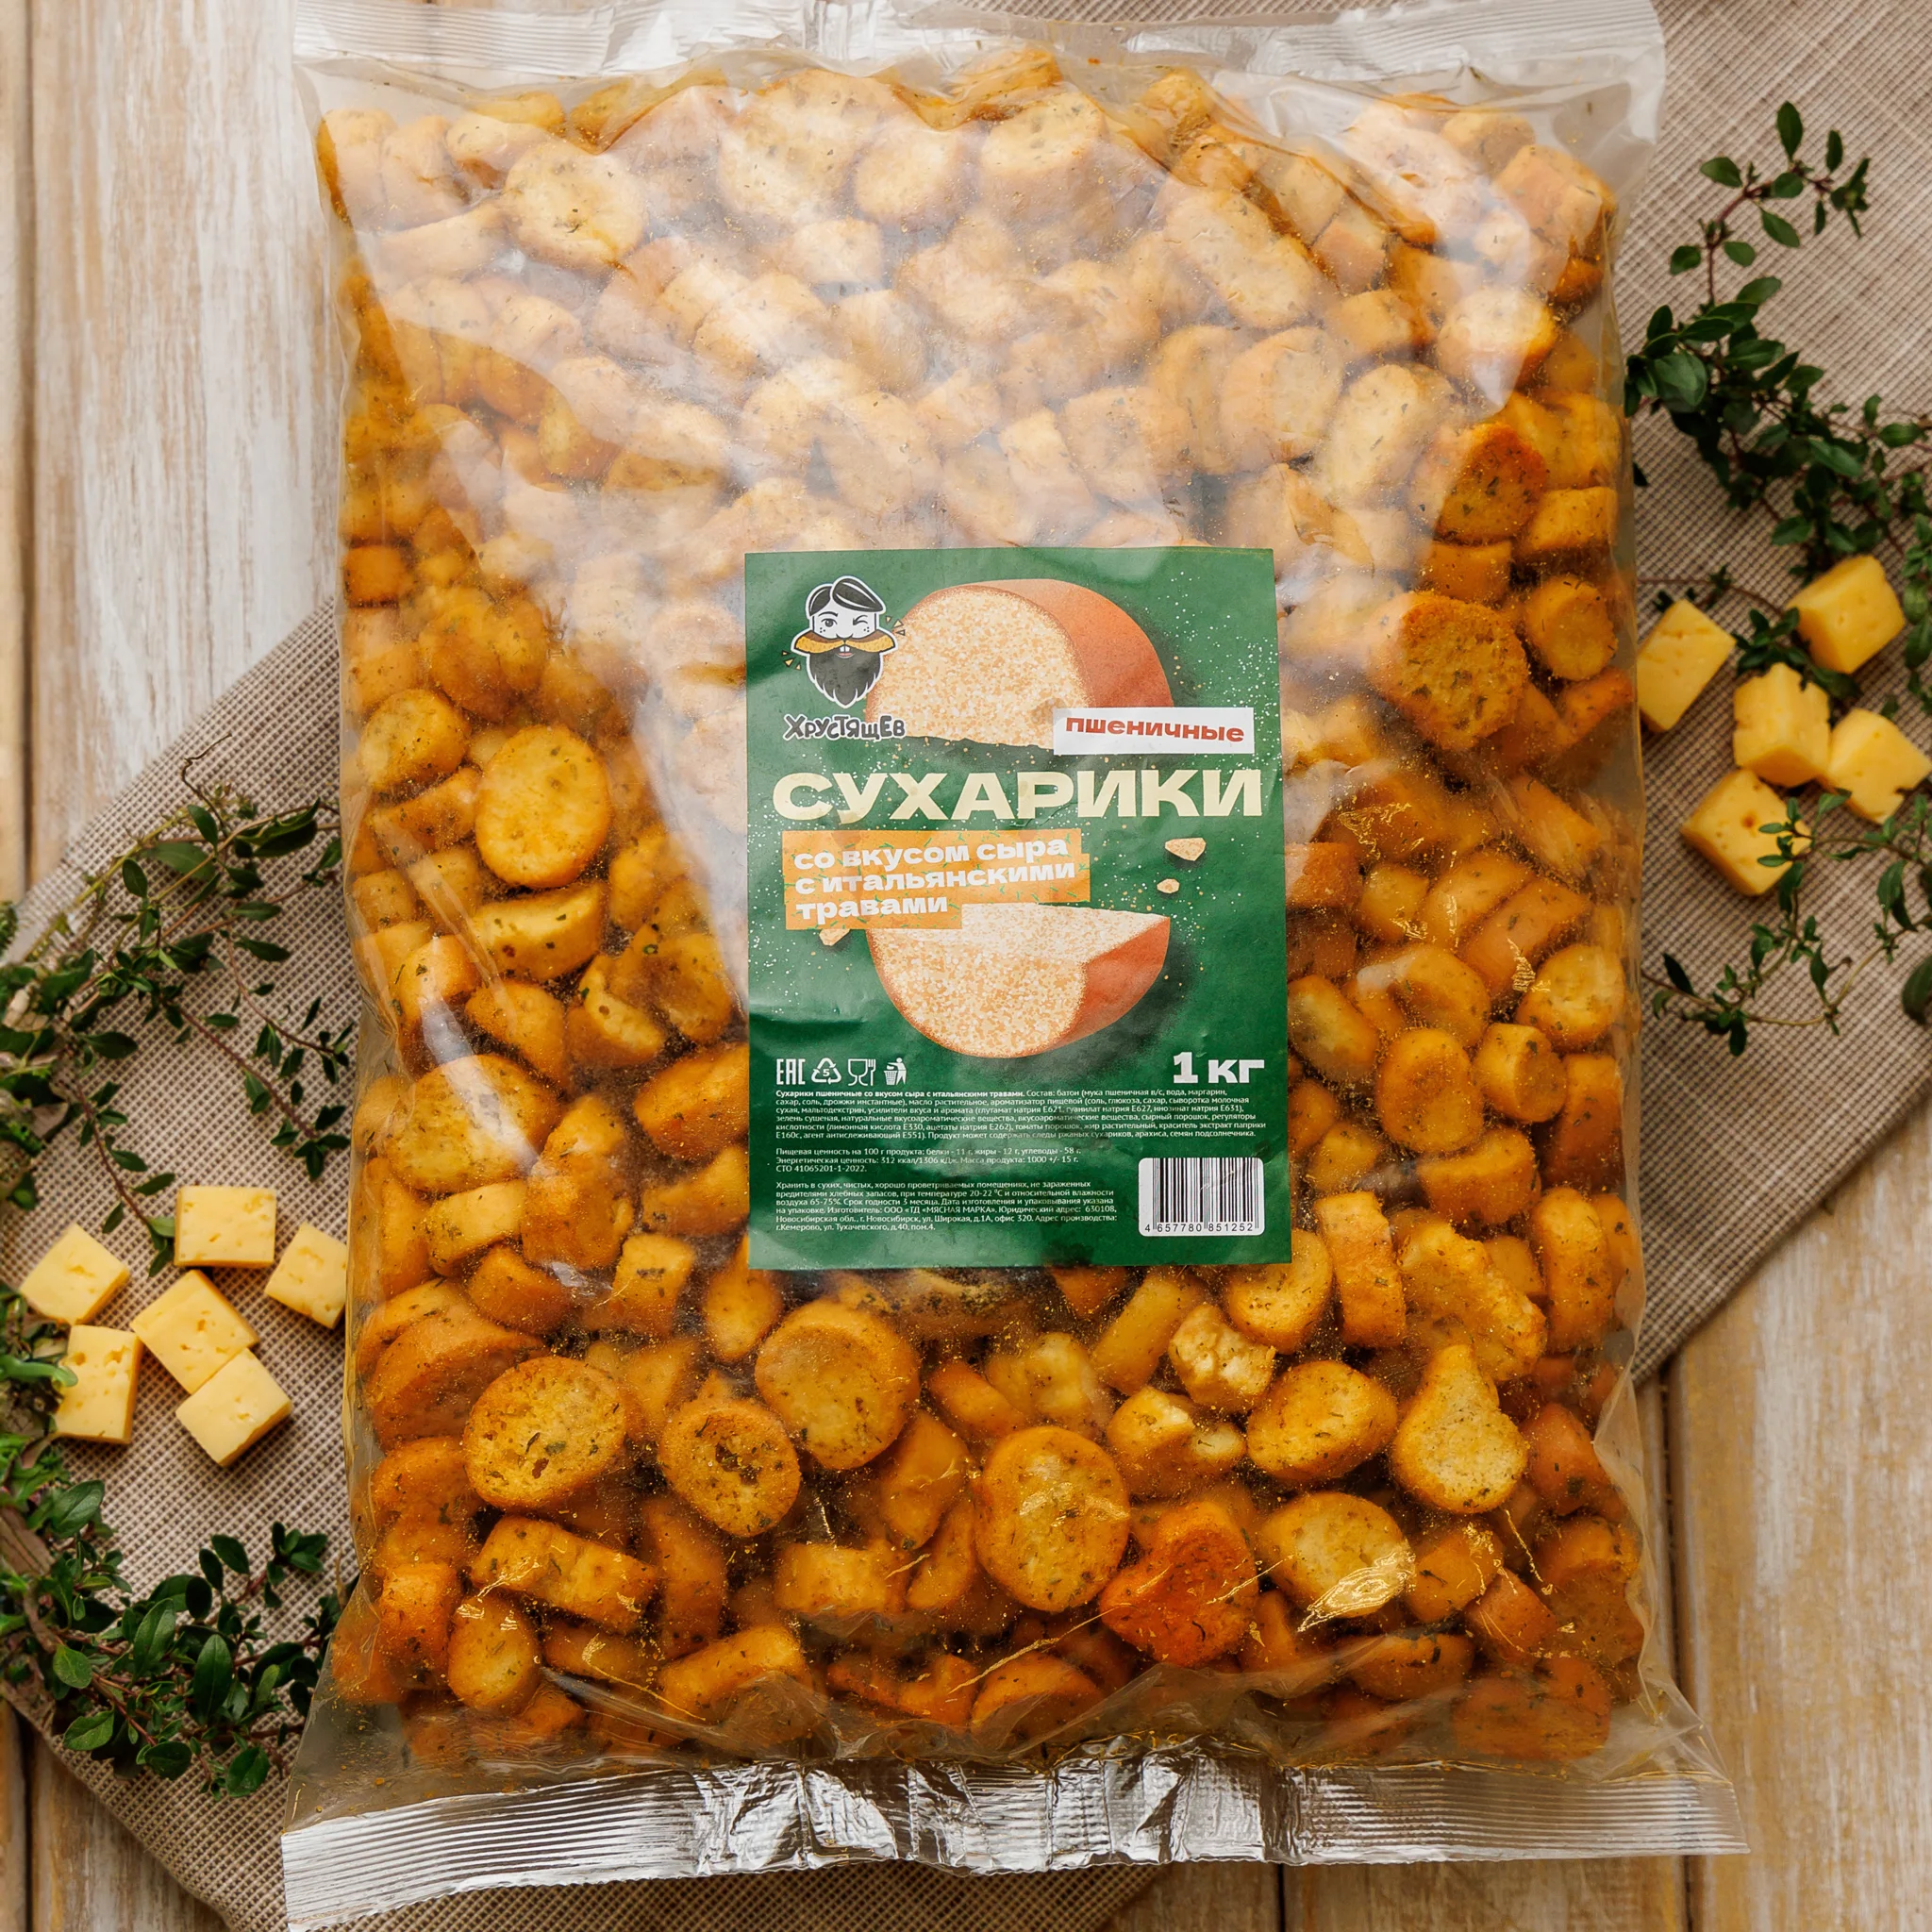 Wheat crackers with the taste of cheese and Italian herbs 1 kg / Crackers cheese and Italian herbs 1000 gr / Croutons / Snacks for soup